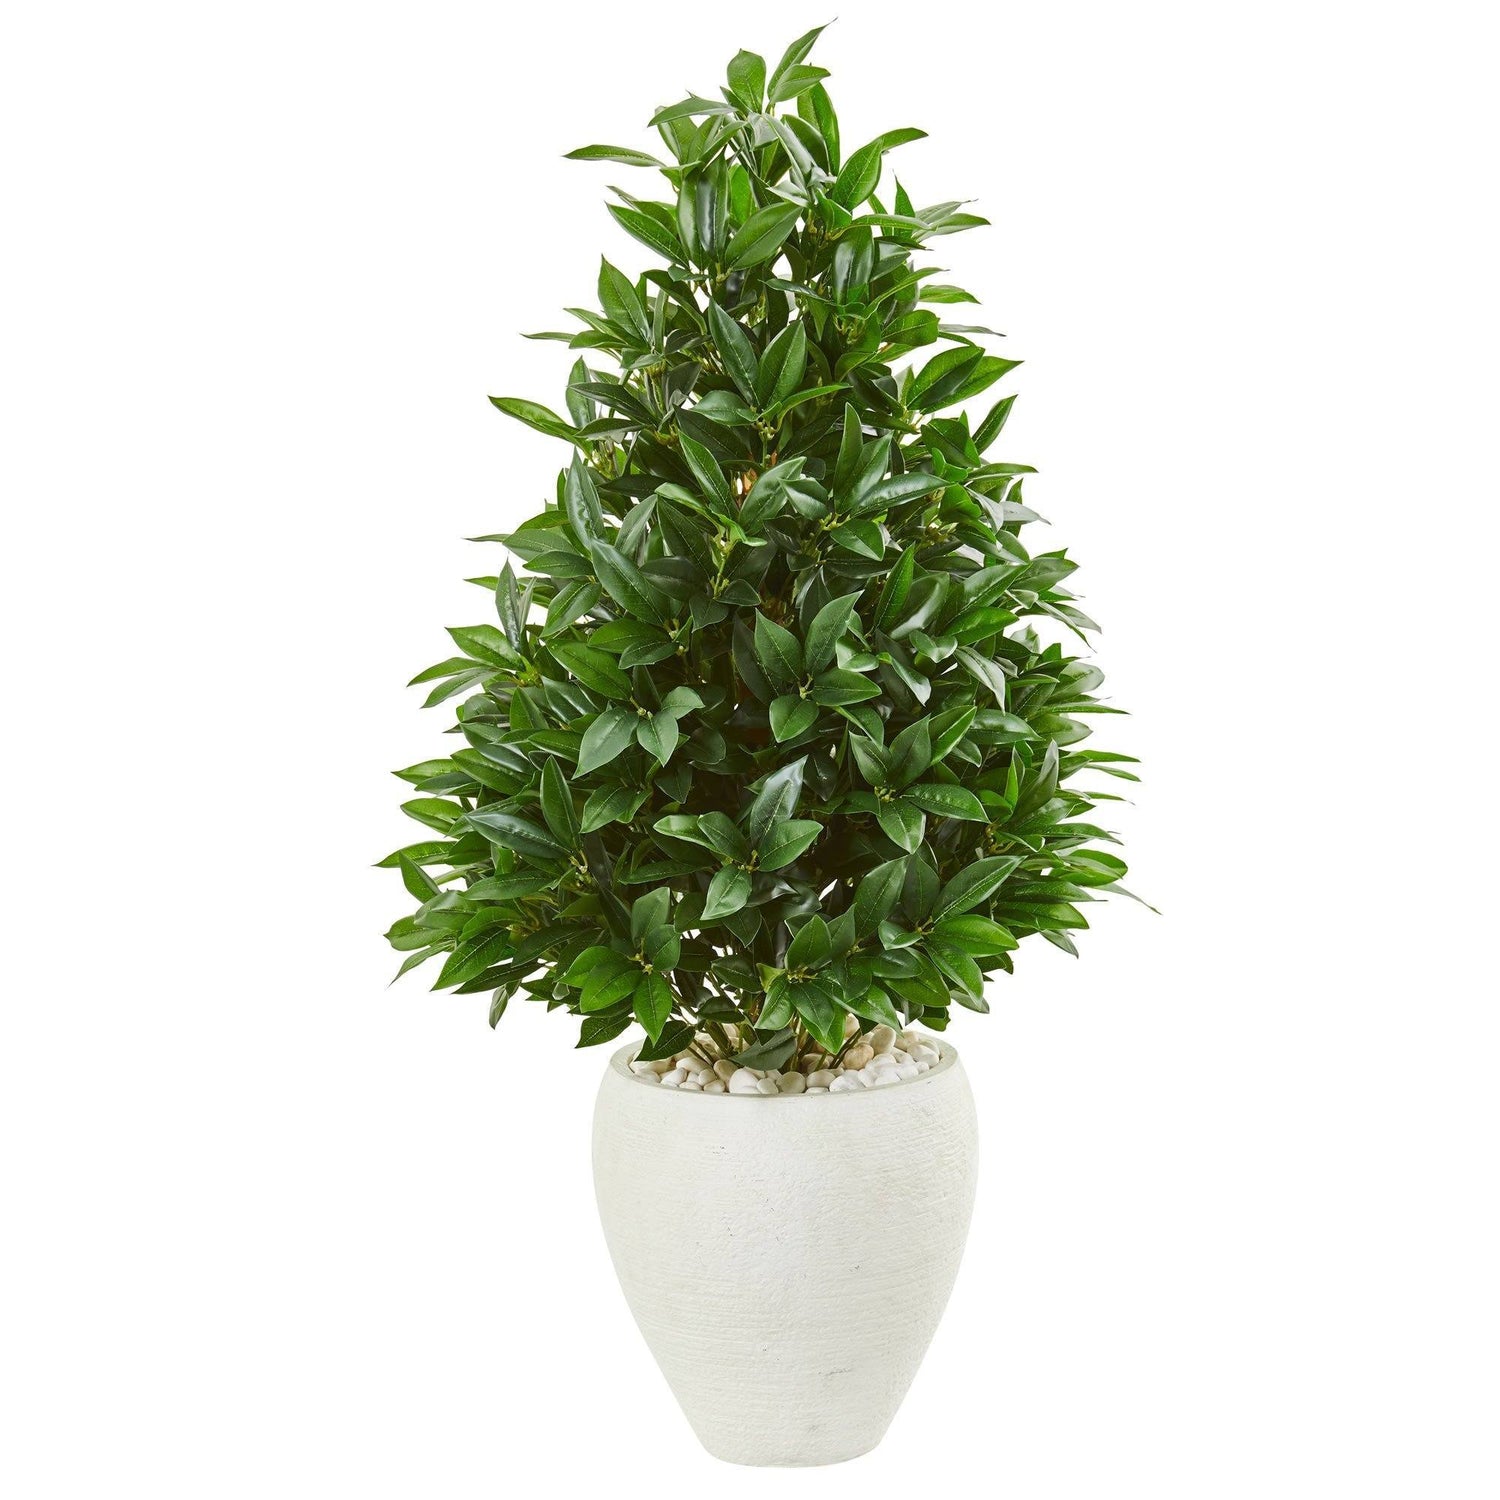 44” Bay Leaf Cone Topiary Artificial Tree in White Planter (Indoor/Outdoor)